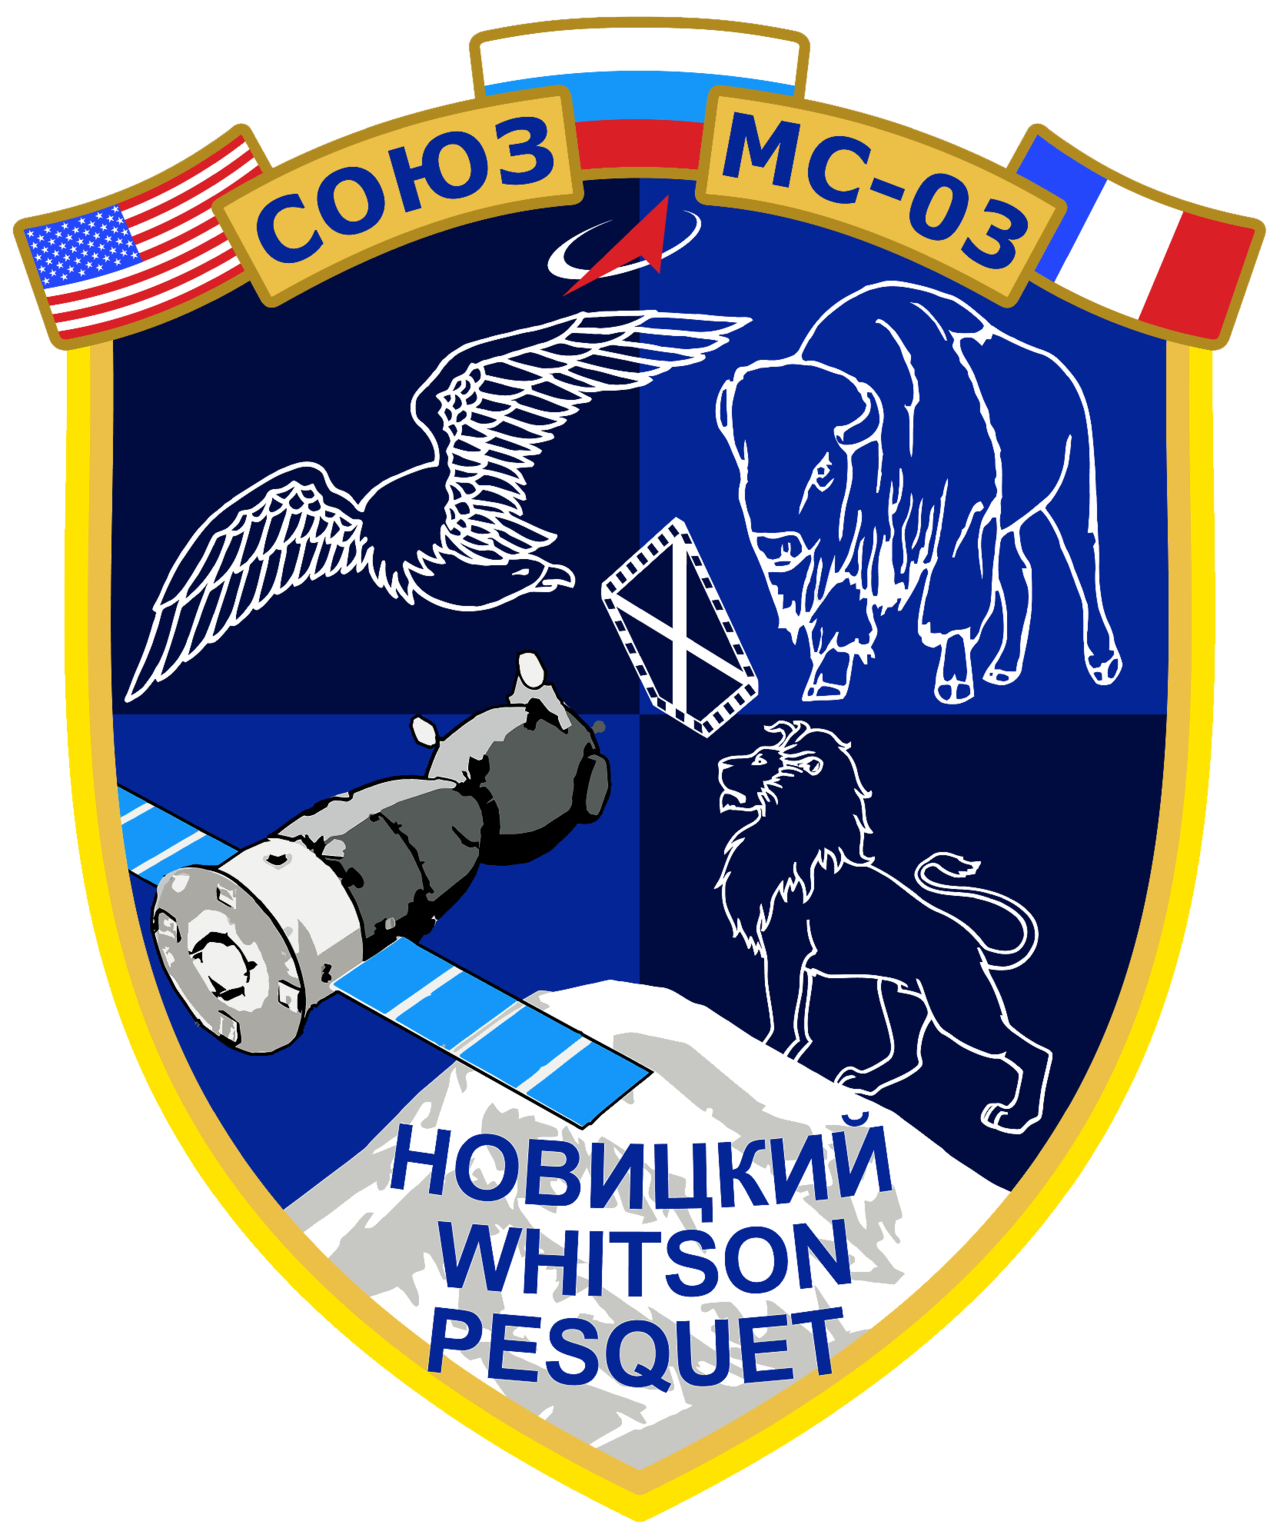 Mission patch for Soyuz MS-03